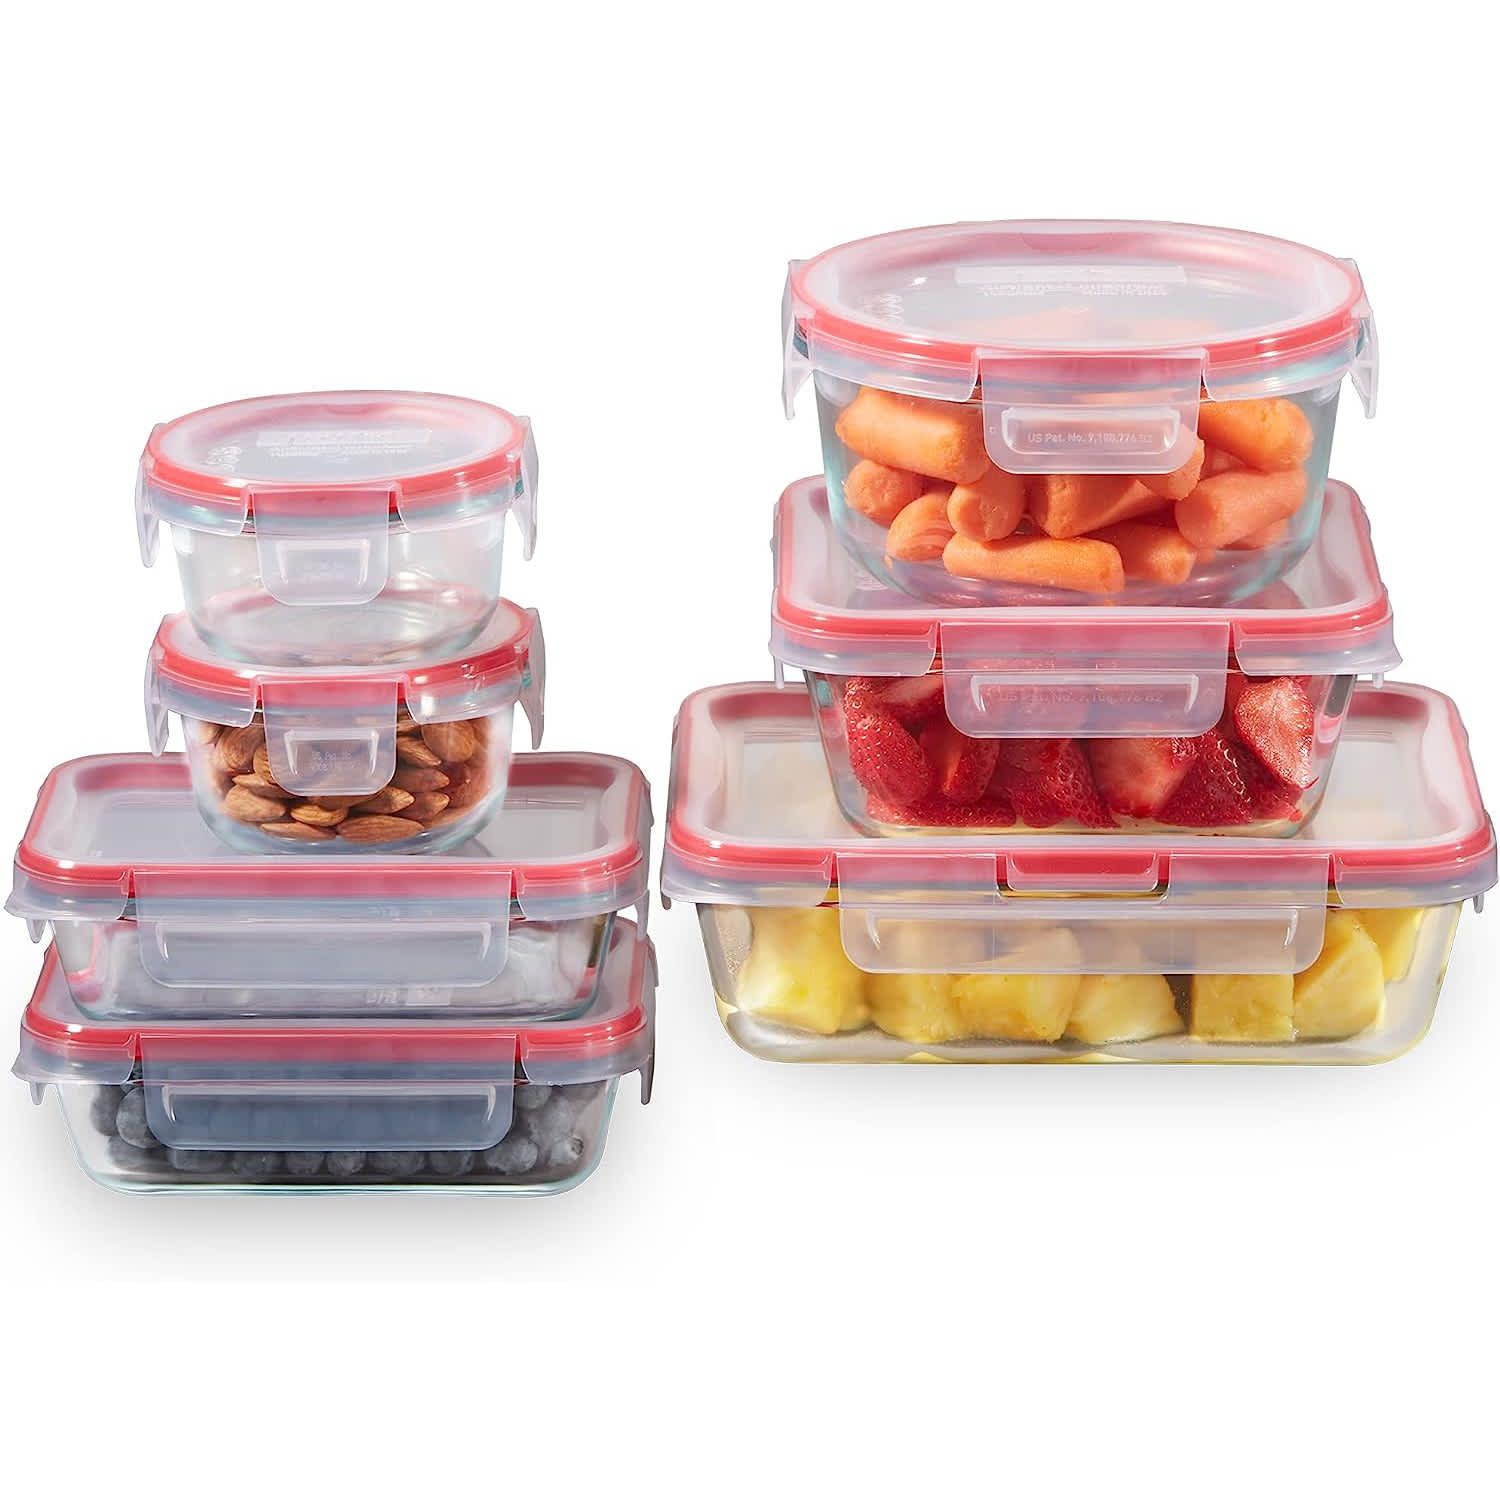 http://cdn.apartmenttherapy.info/image/upload/v1688408448/commerce/Pyrex-Freshlock-14-Piece-Mixed-Size-Glass-Food-Storage-Container-Set-amazon.jpg